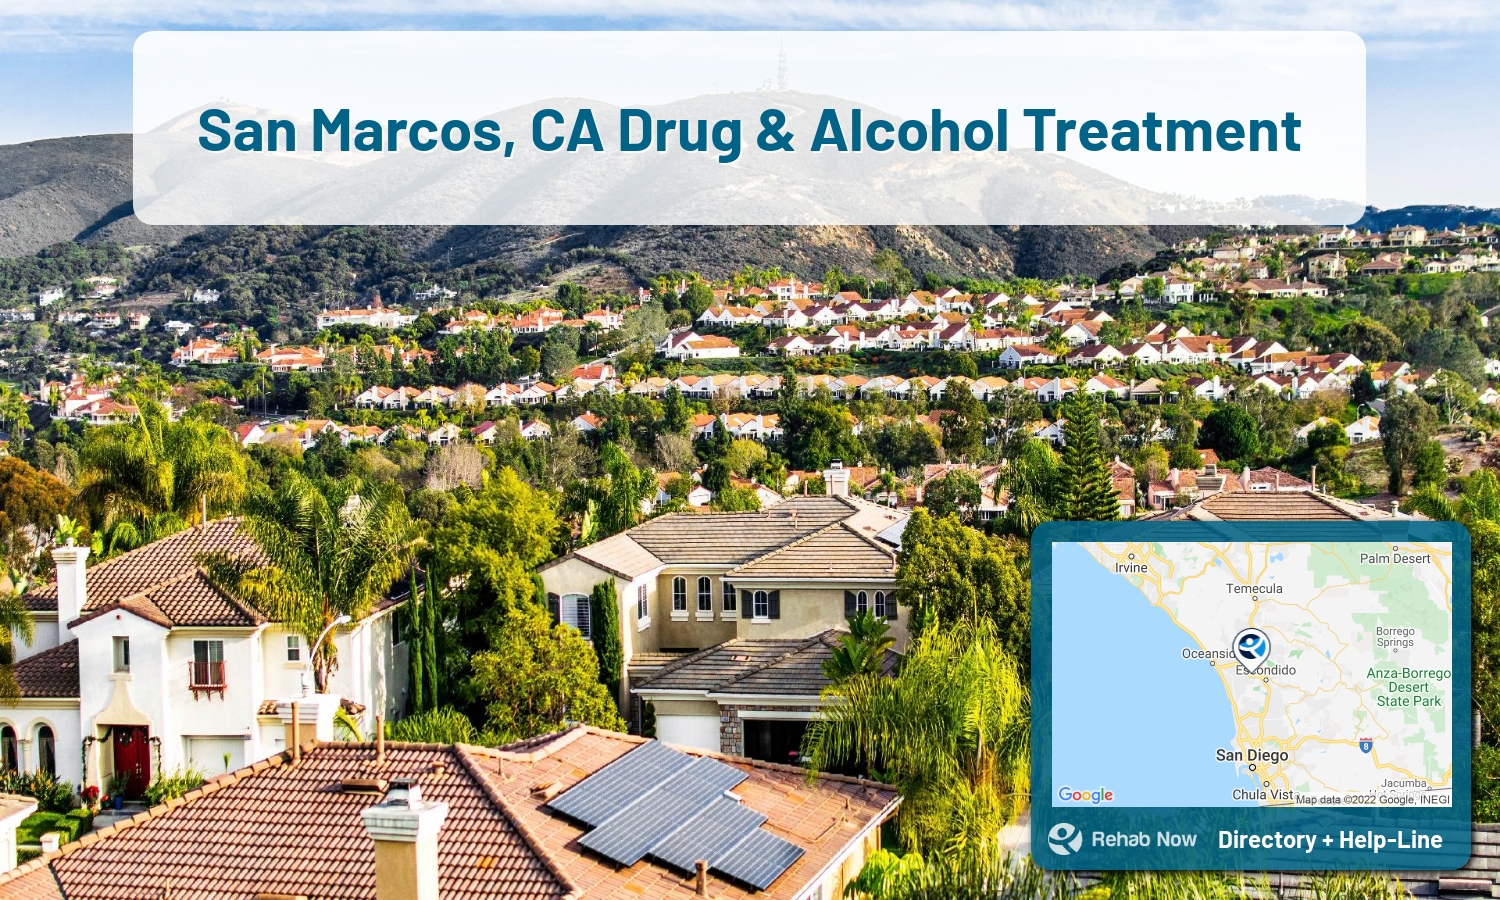 San Marcos, CA Treatment Centers. Find drug rehab in San Marcos, California, or detox and treatment programs. Get the right help now!